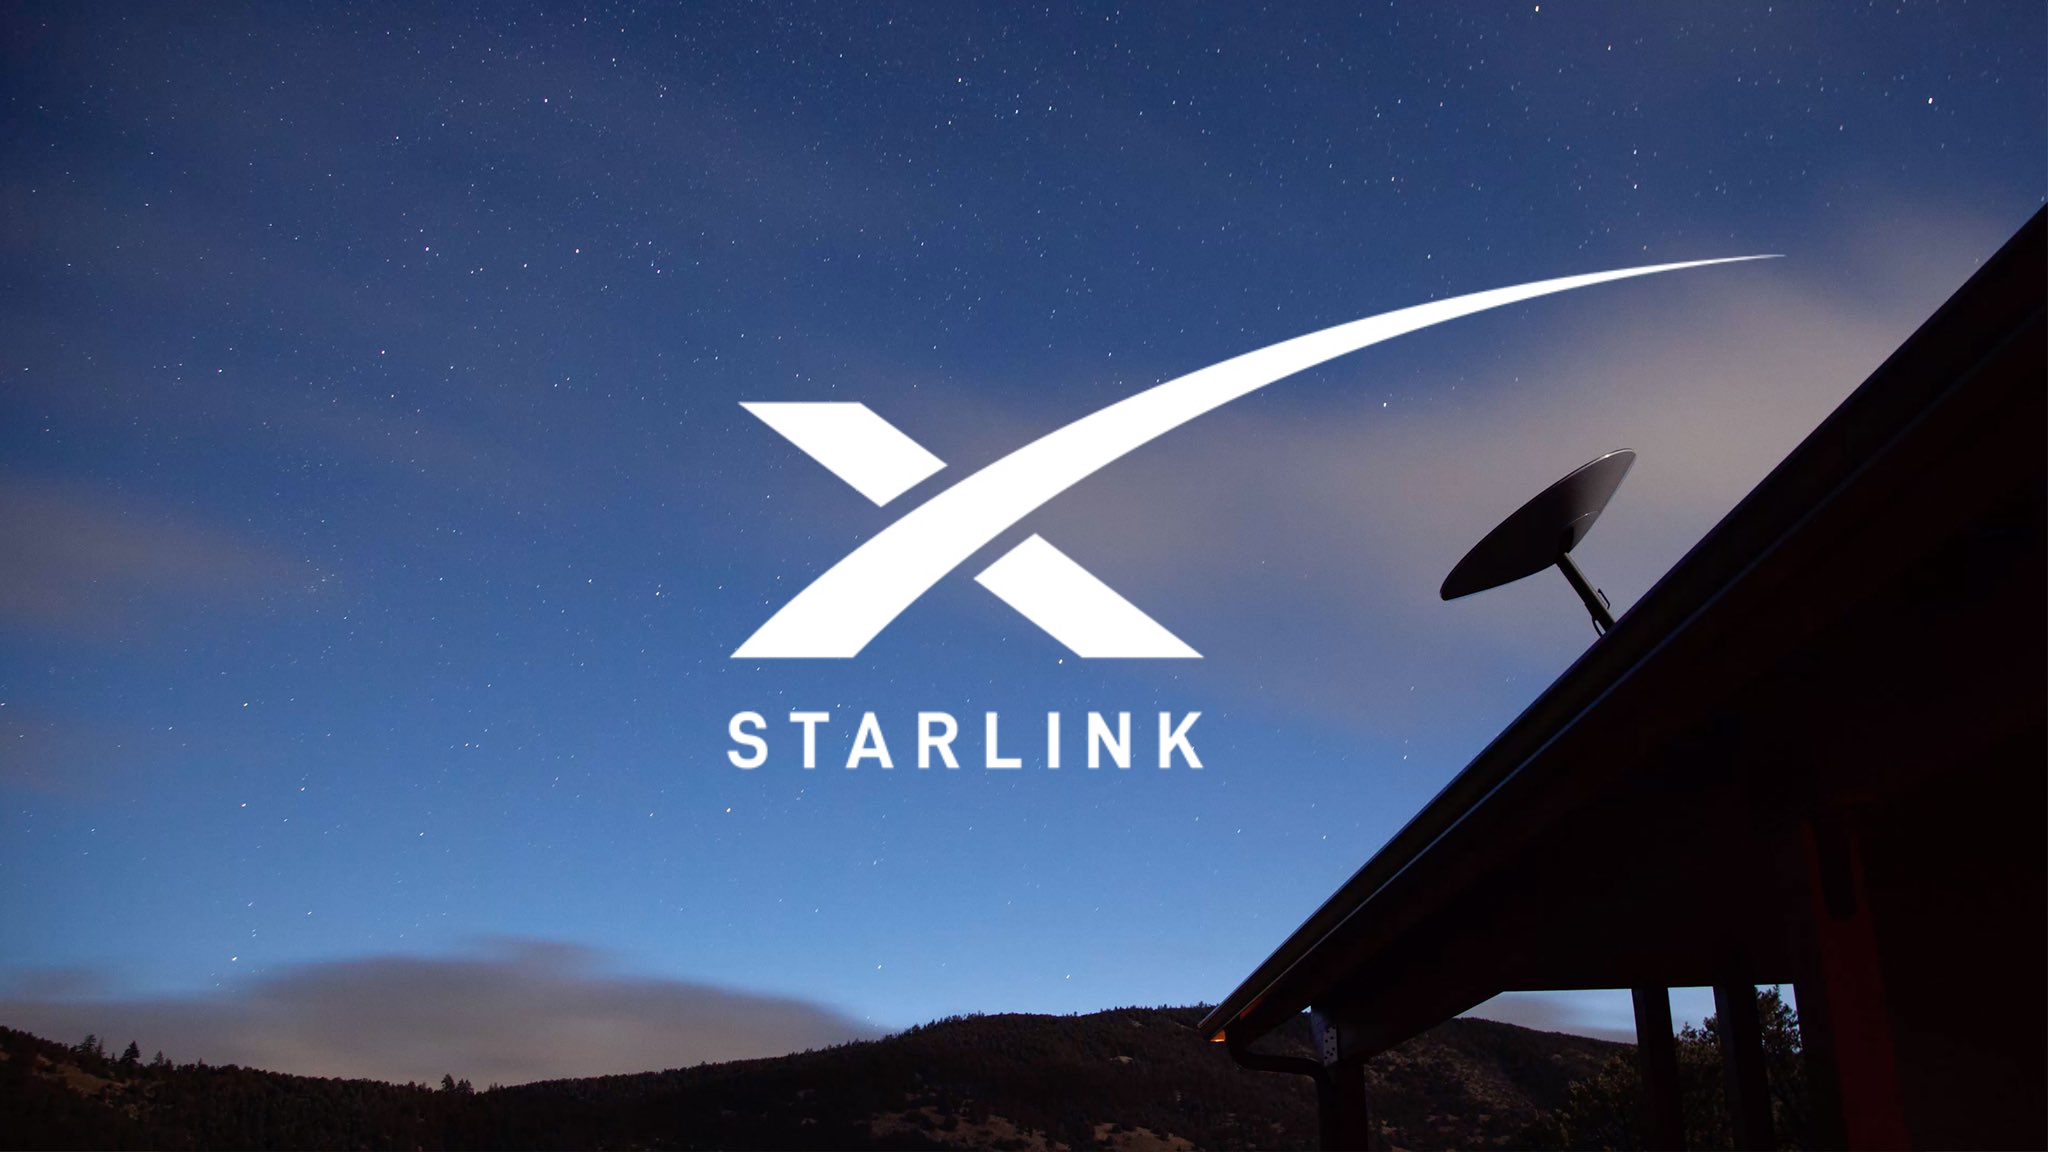 After several delays SpaceX aims to launch the tenth Starlink mission over the weekend